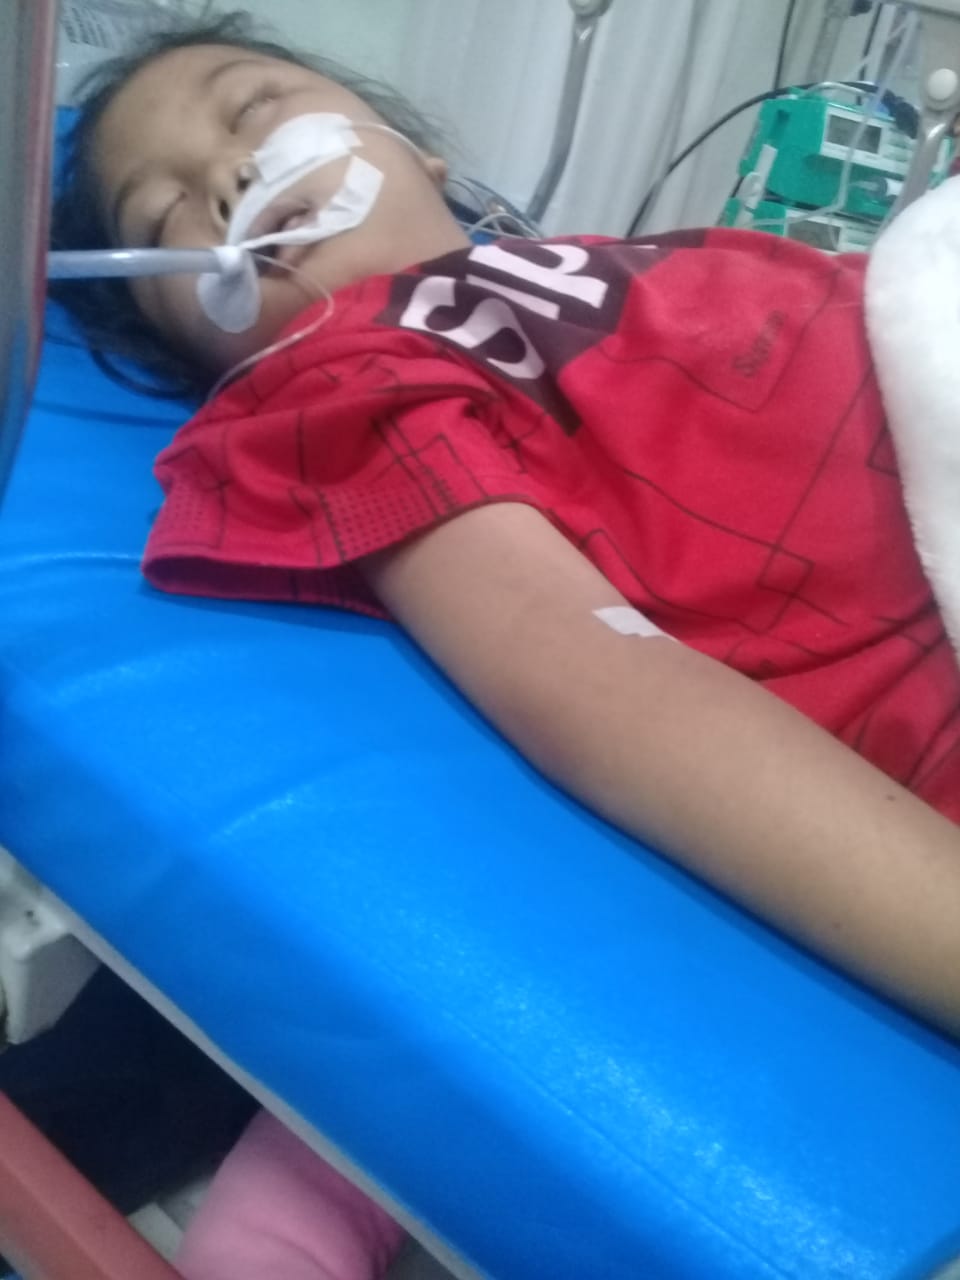 Nur Fathya Agustina at the time of her coma at hospital.